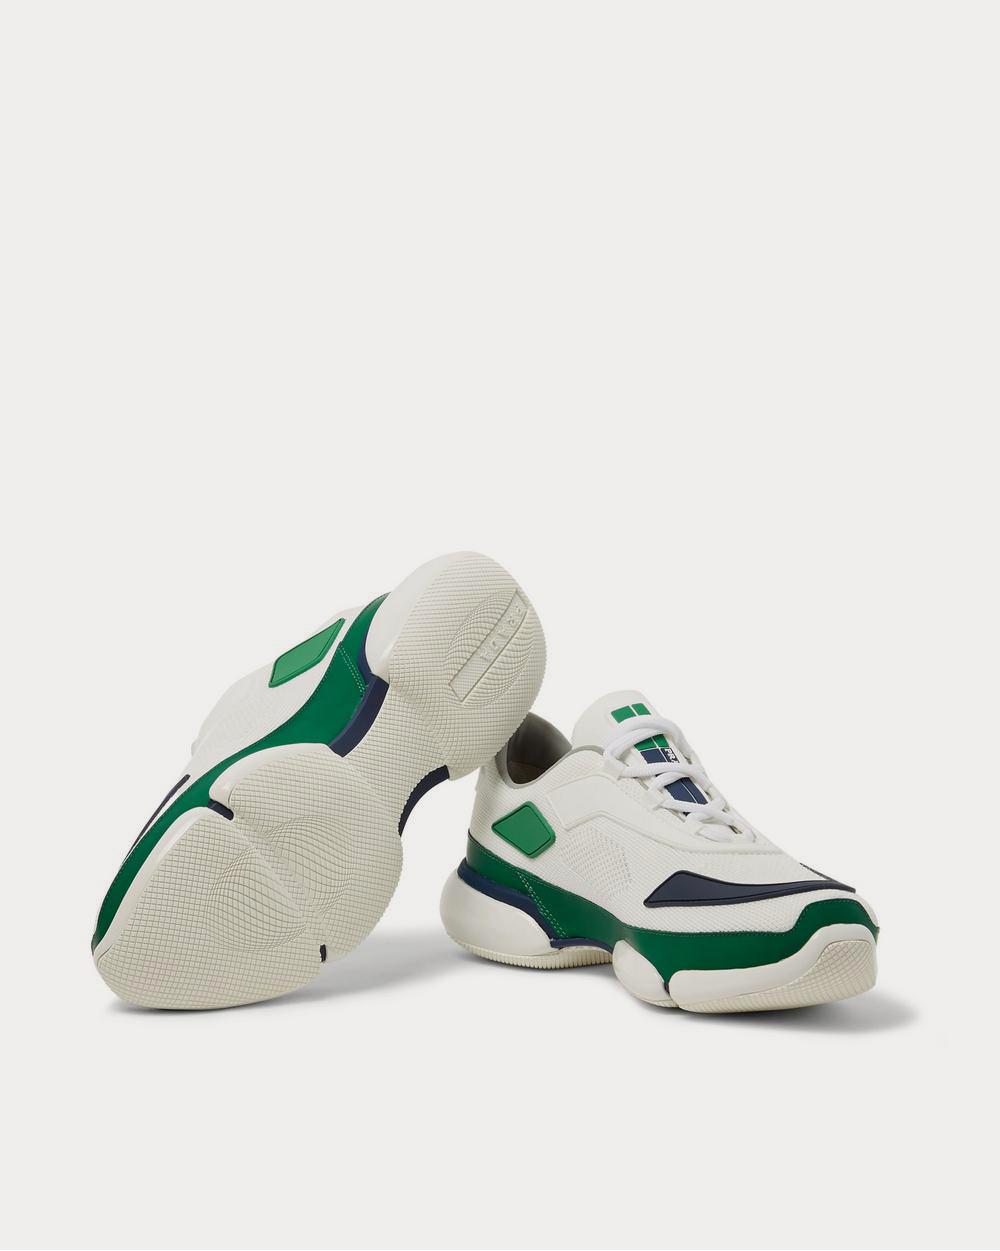 Prada - Cloudbust Mesh, Rubber and Leather  White low top sneakers